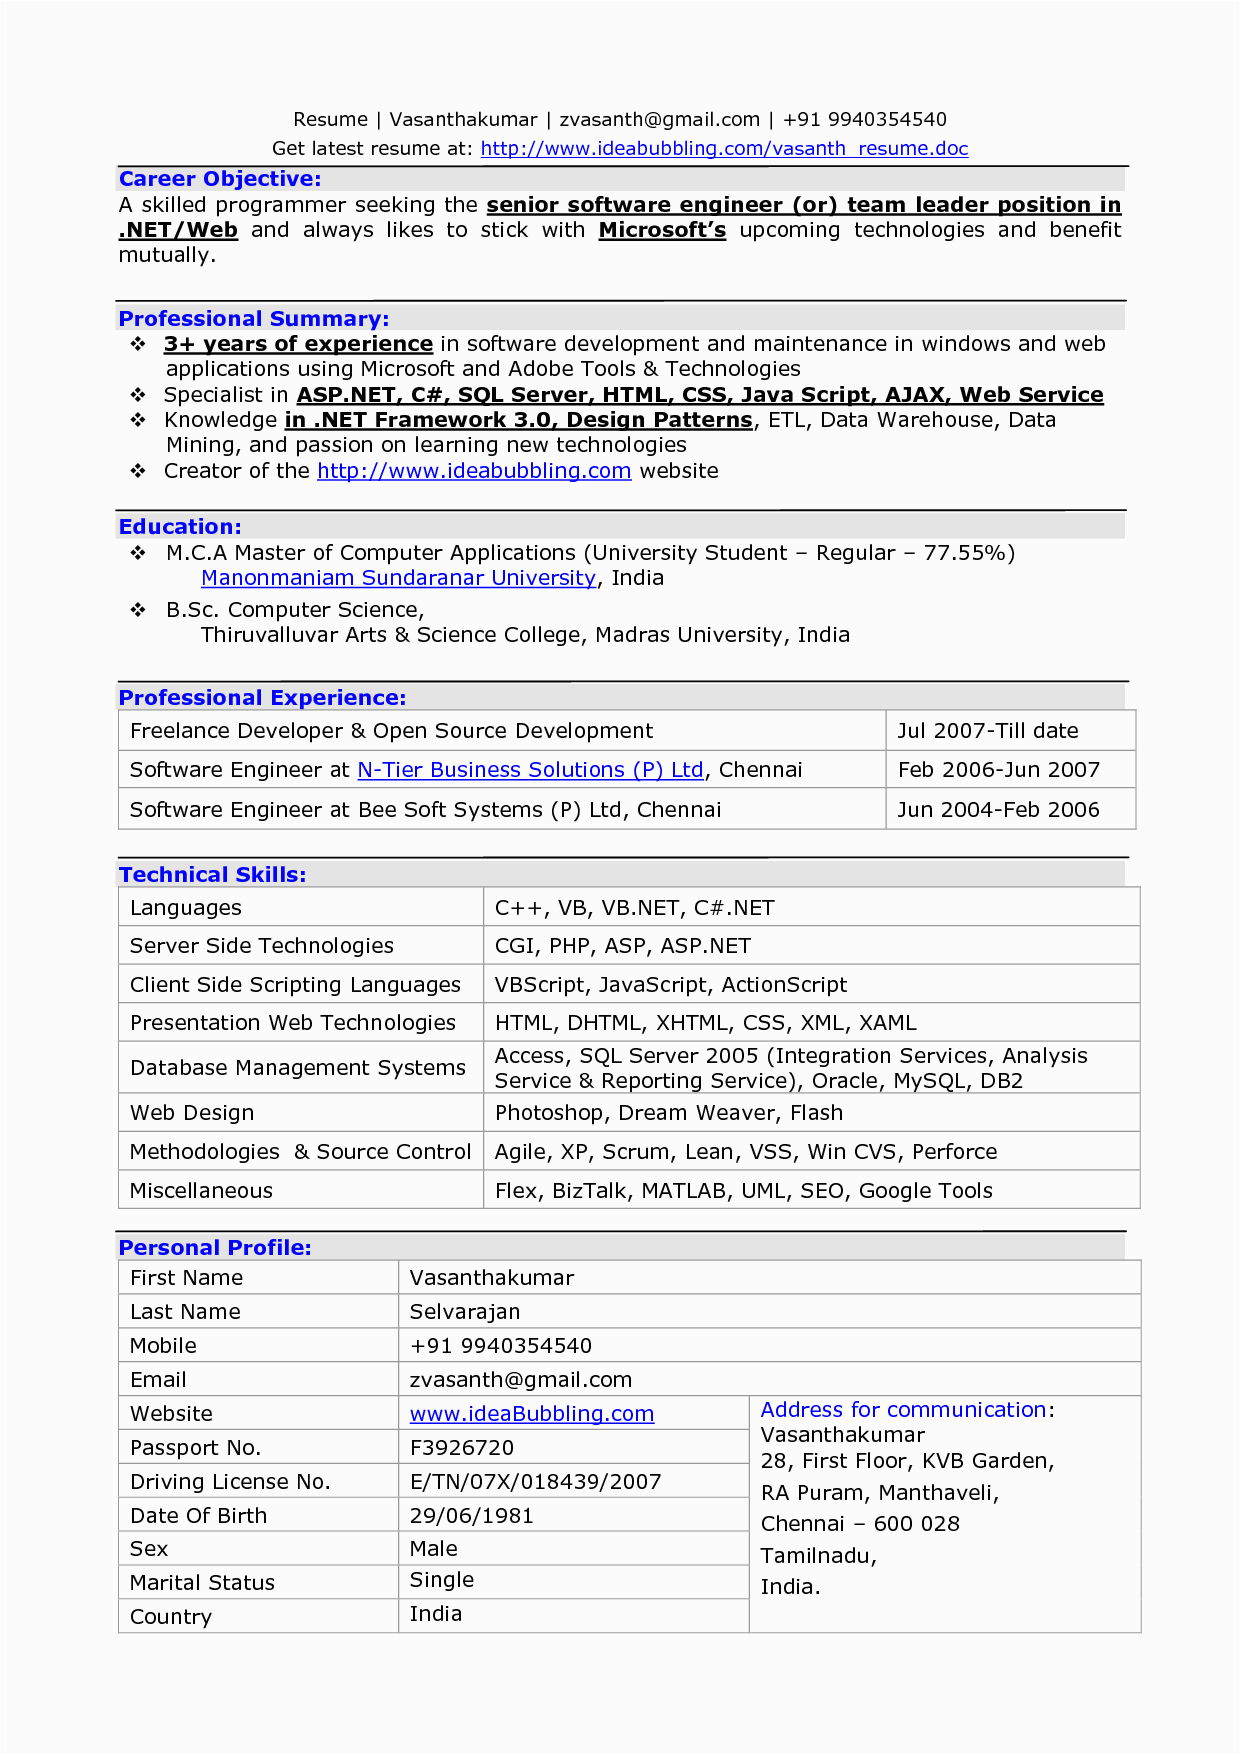 Resume Samples for Experienced software Developer for 6 Months Experienced software Engineer